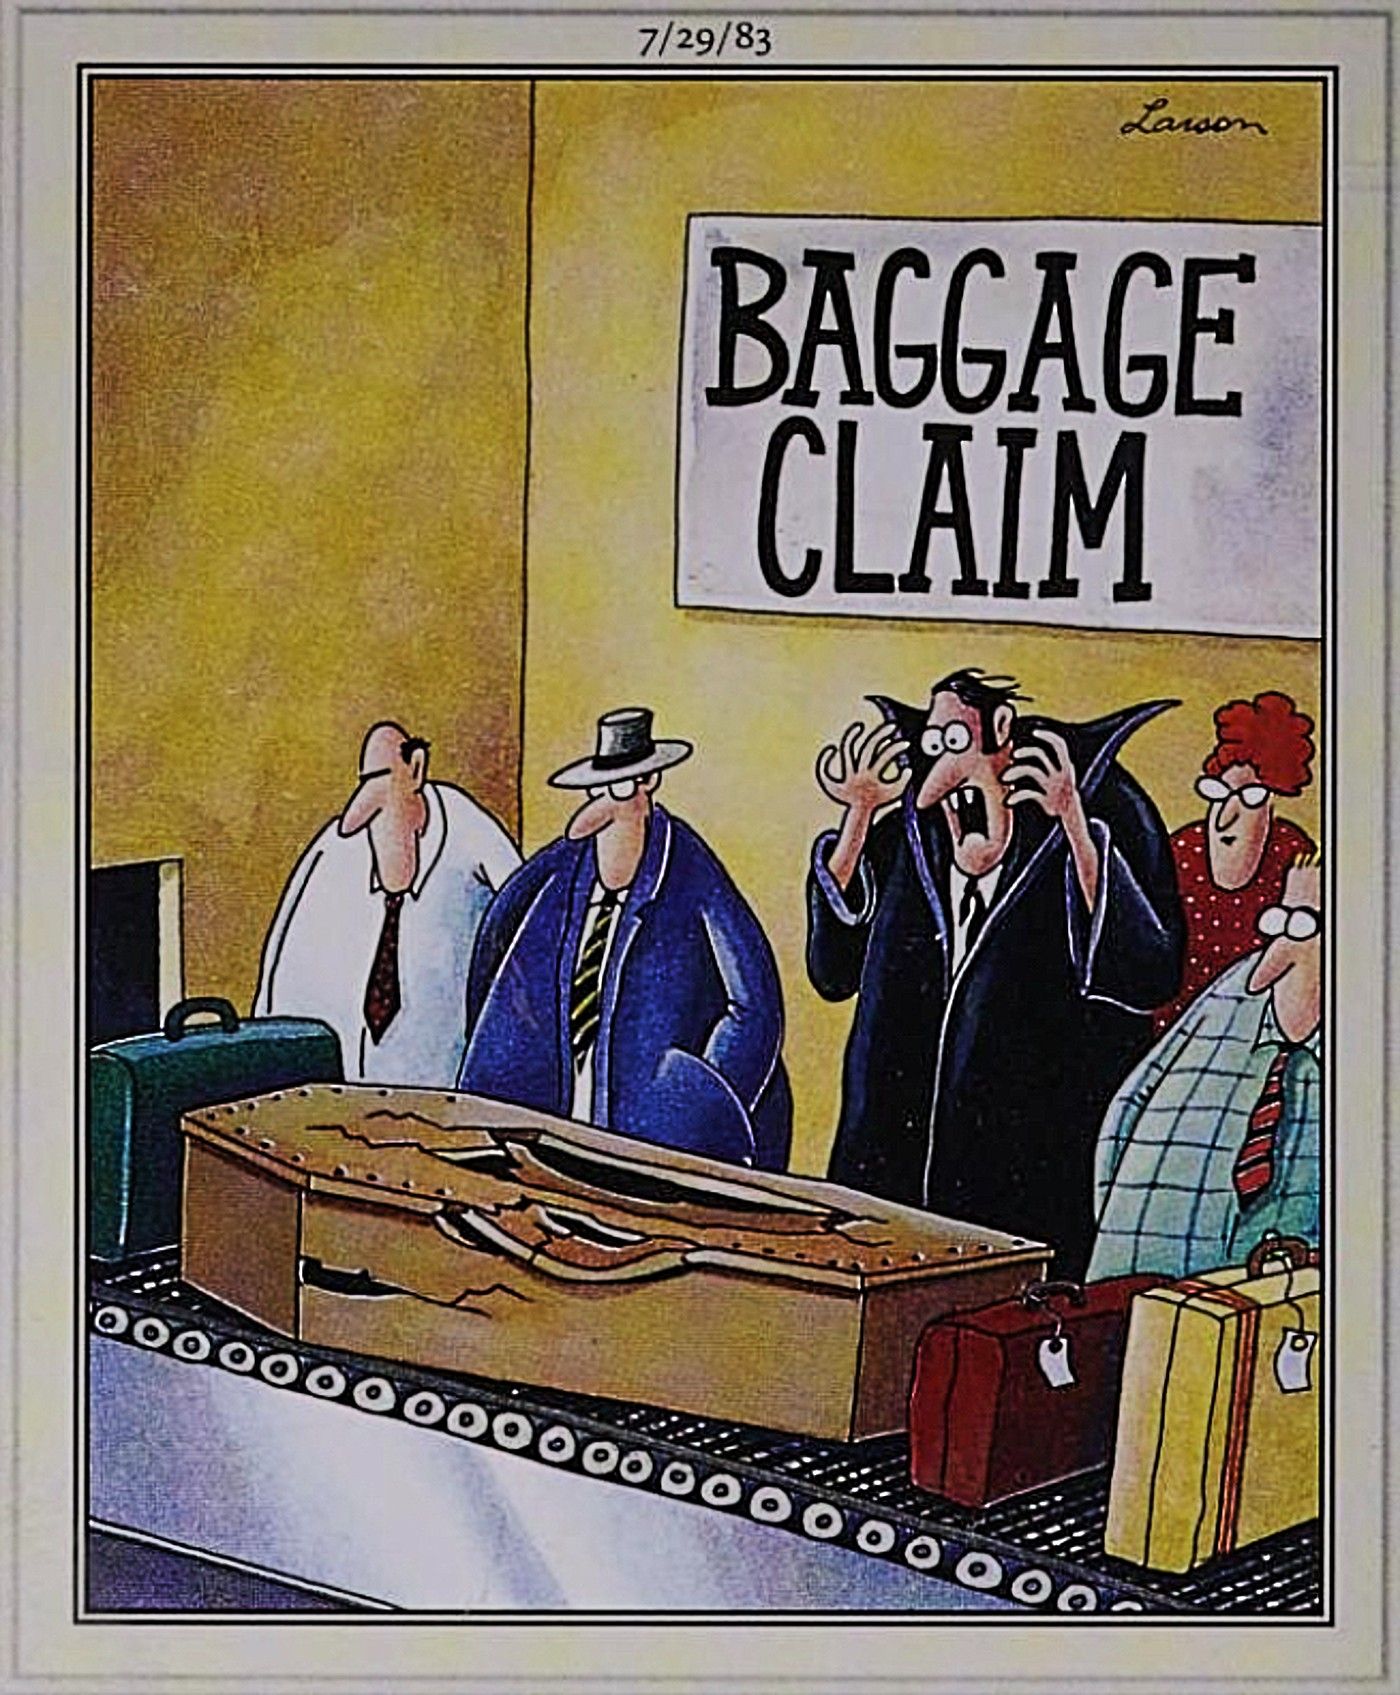 Far Side, vampire's coffin is destroyed at baggage claim